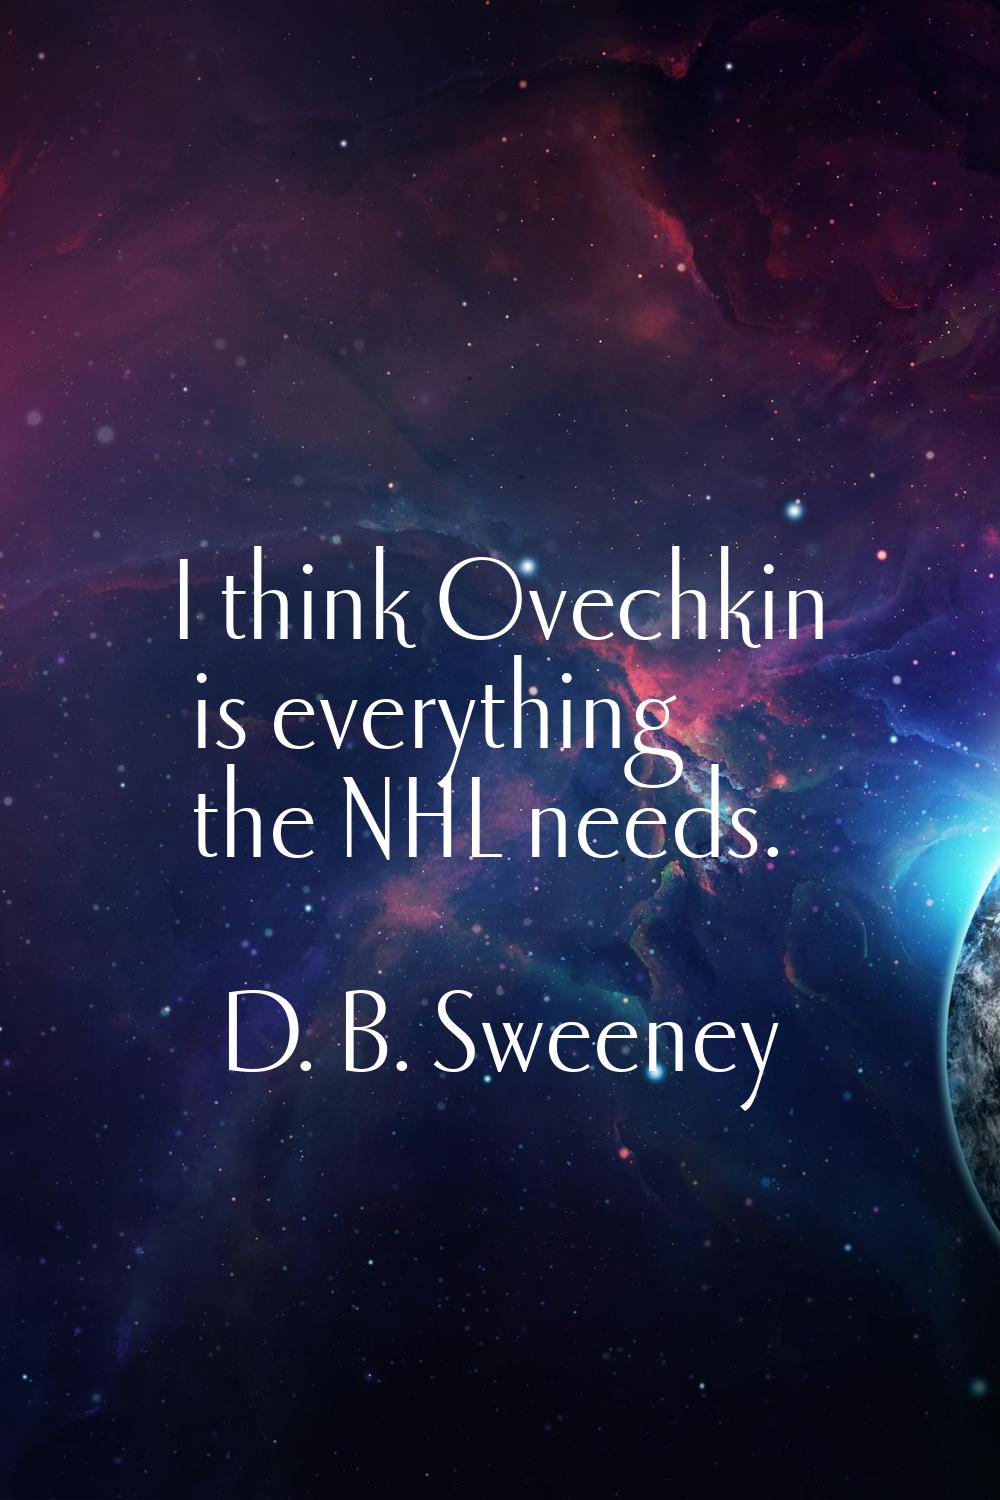 I think Ovechkin is everything the NHL needs.